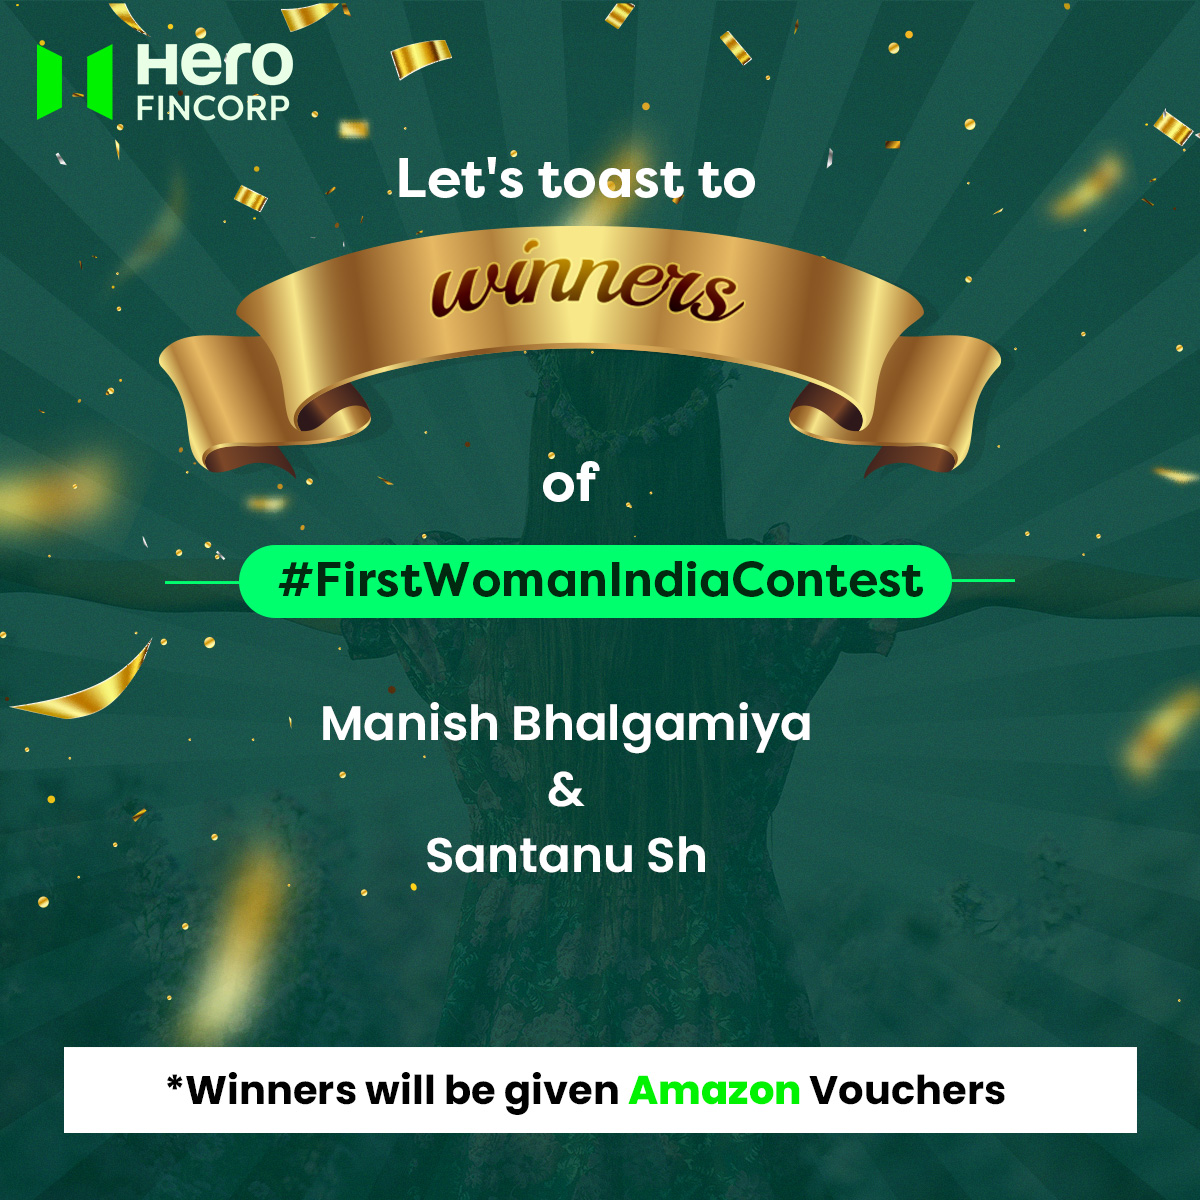 Announcing the #FirstWomanIndiacontest winners! Congratulations to the winners and thank you to everyone who participated!🤗

#HeroFinCorp #ContestWinners #Cheers #AmazonVoucher #Congratulations